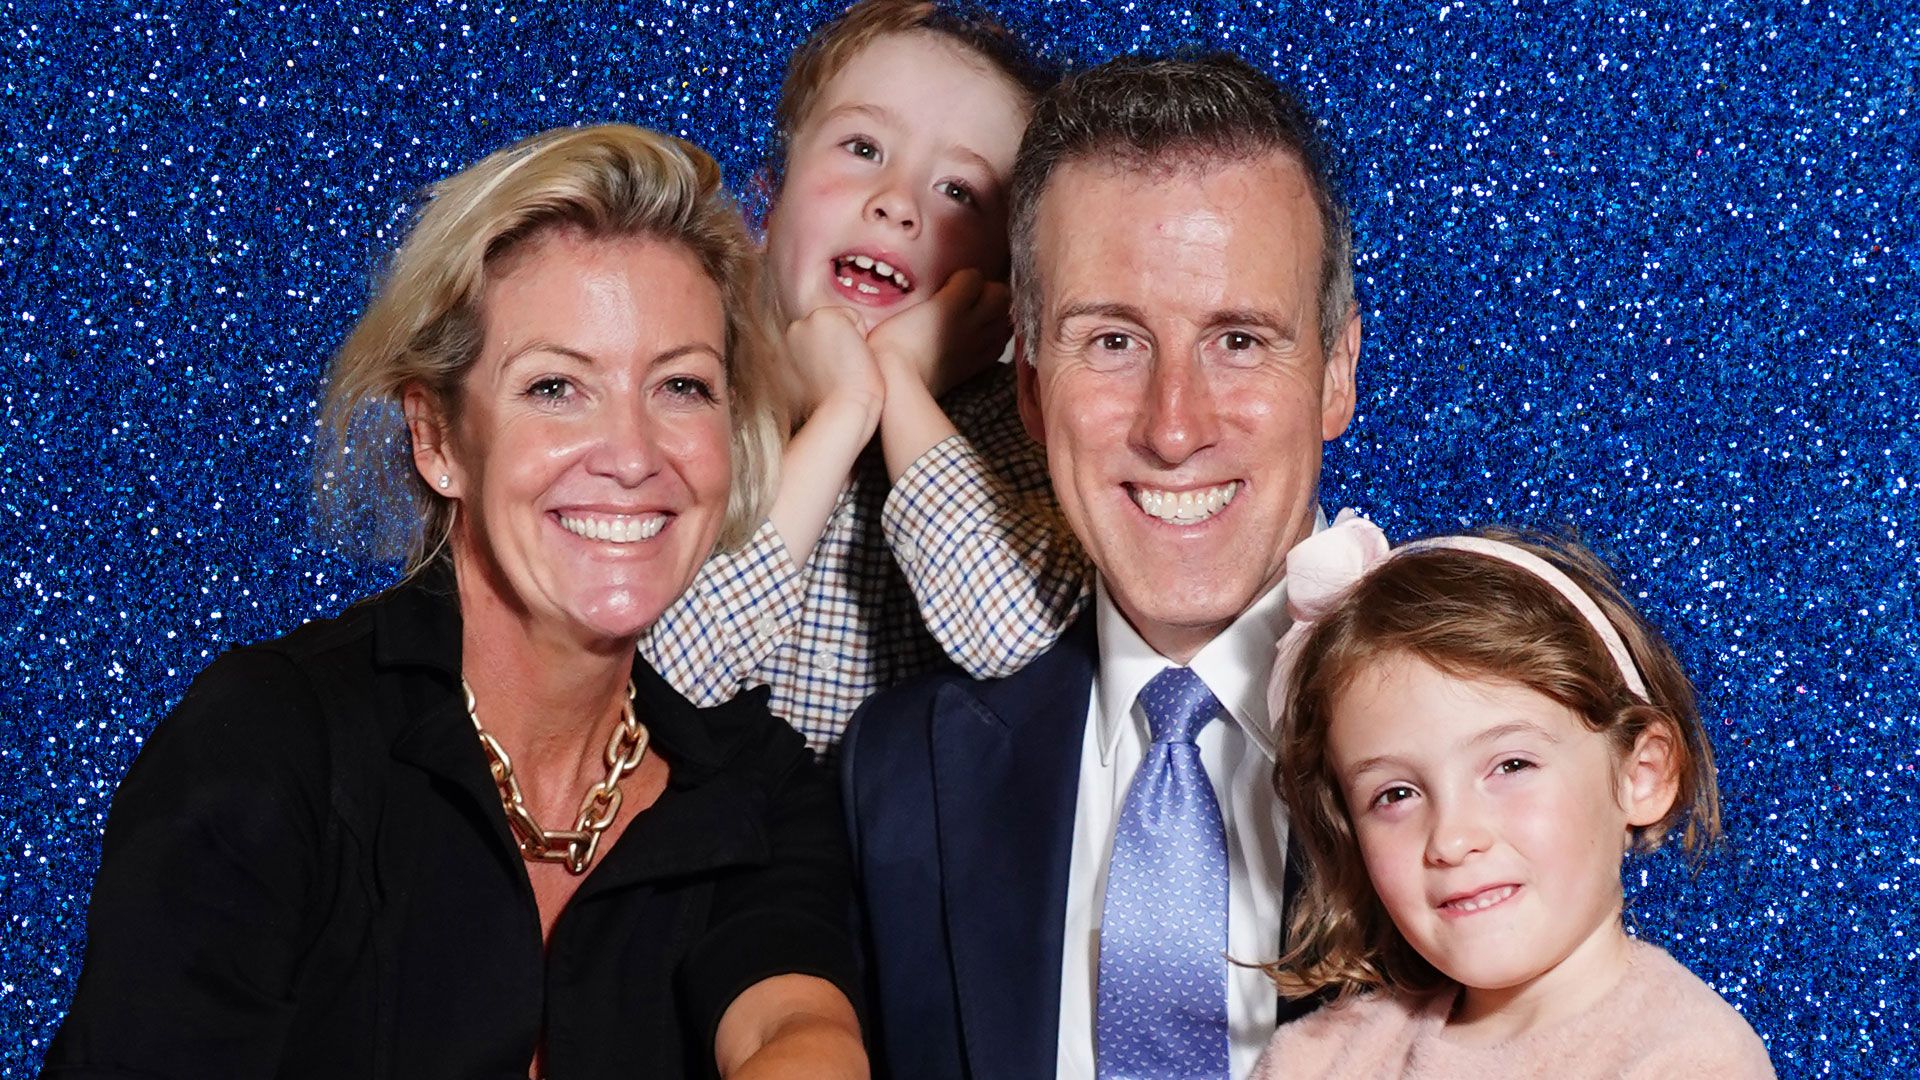 Anton Du Beke with wife and kids on glitter backdrop